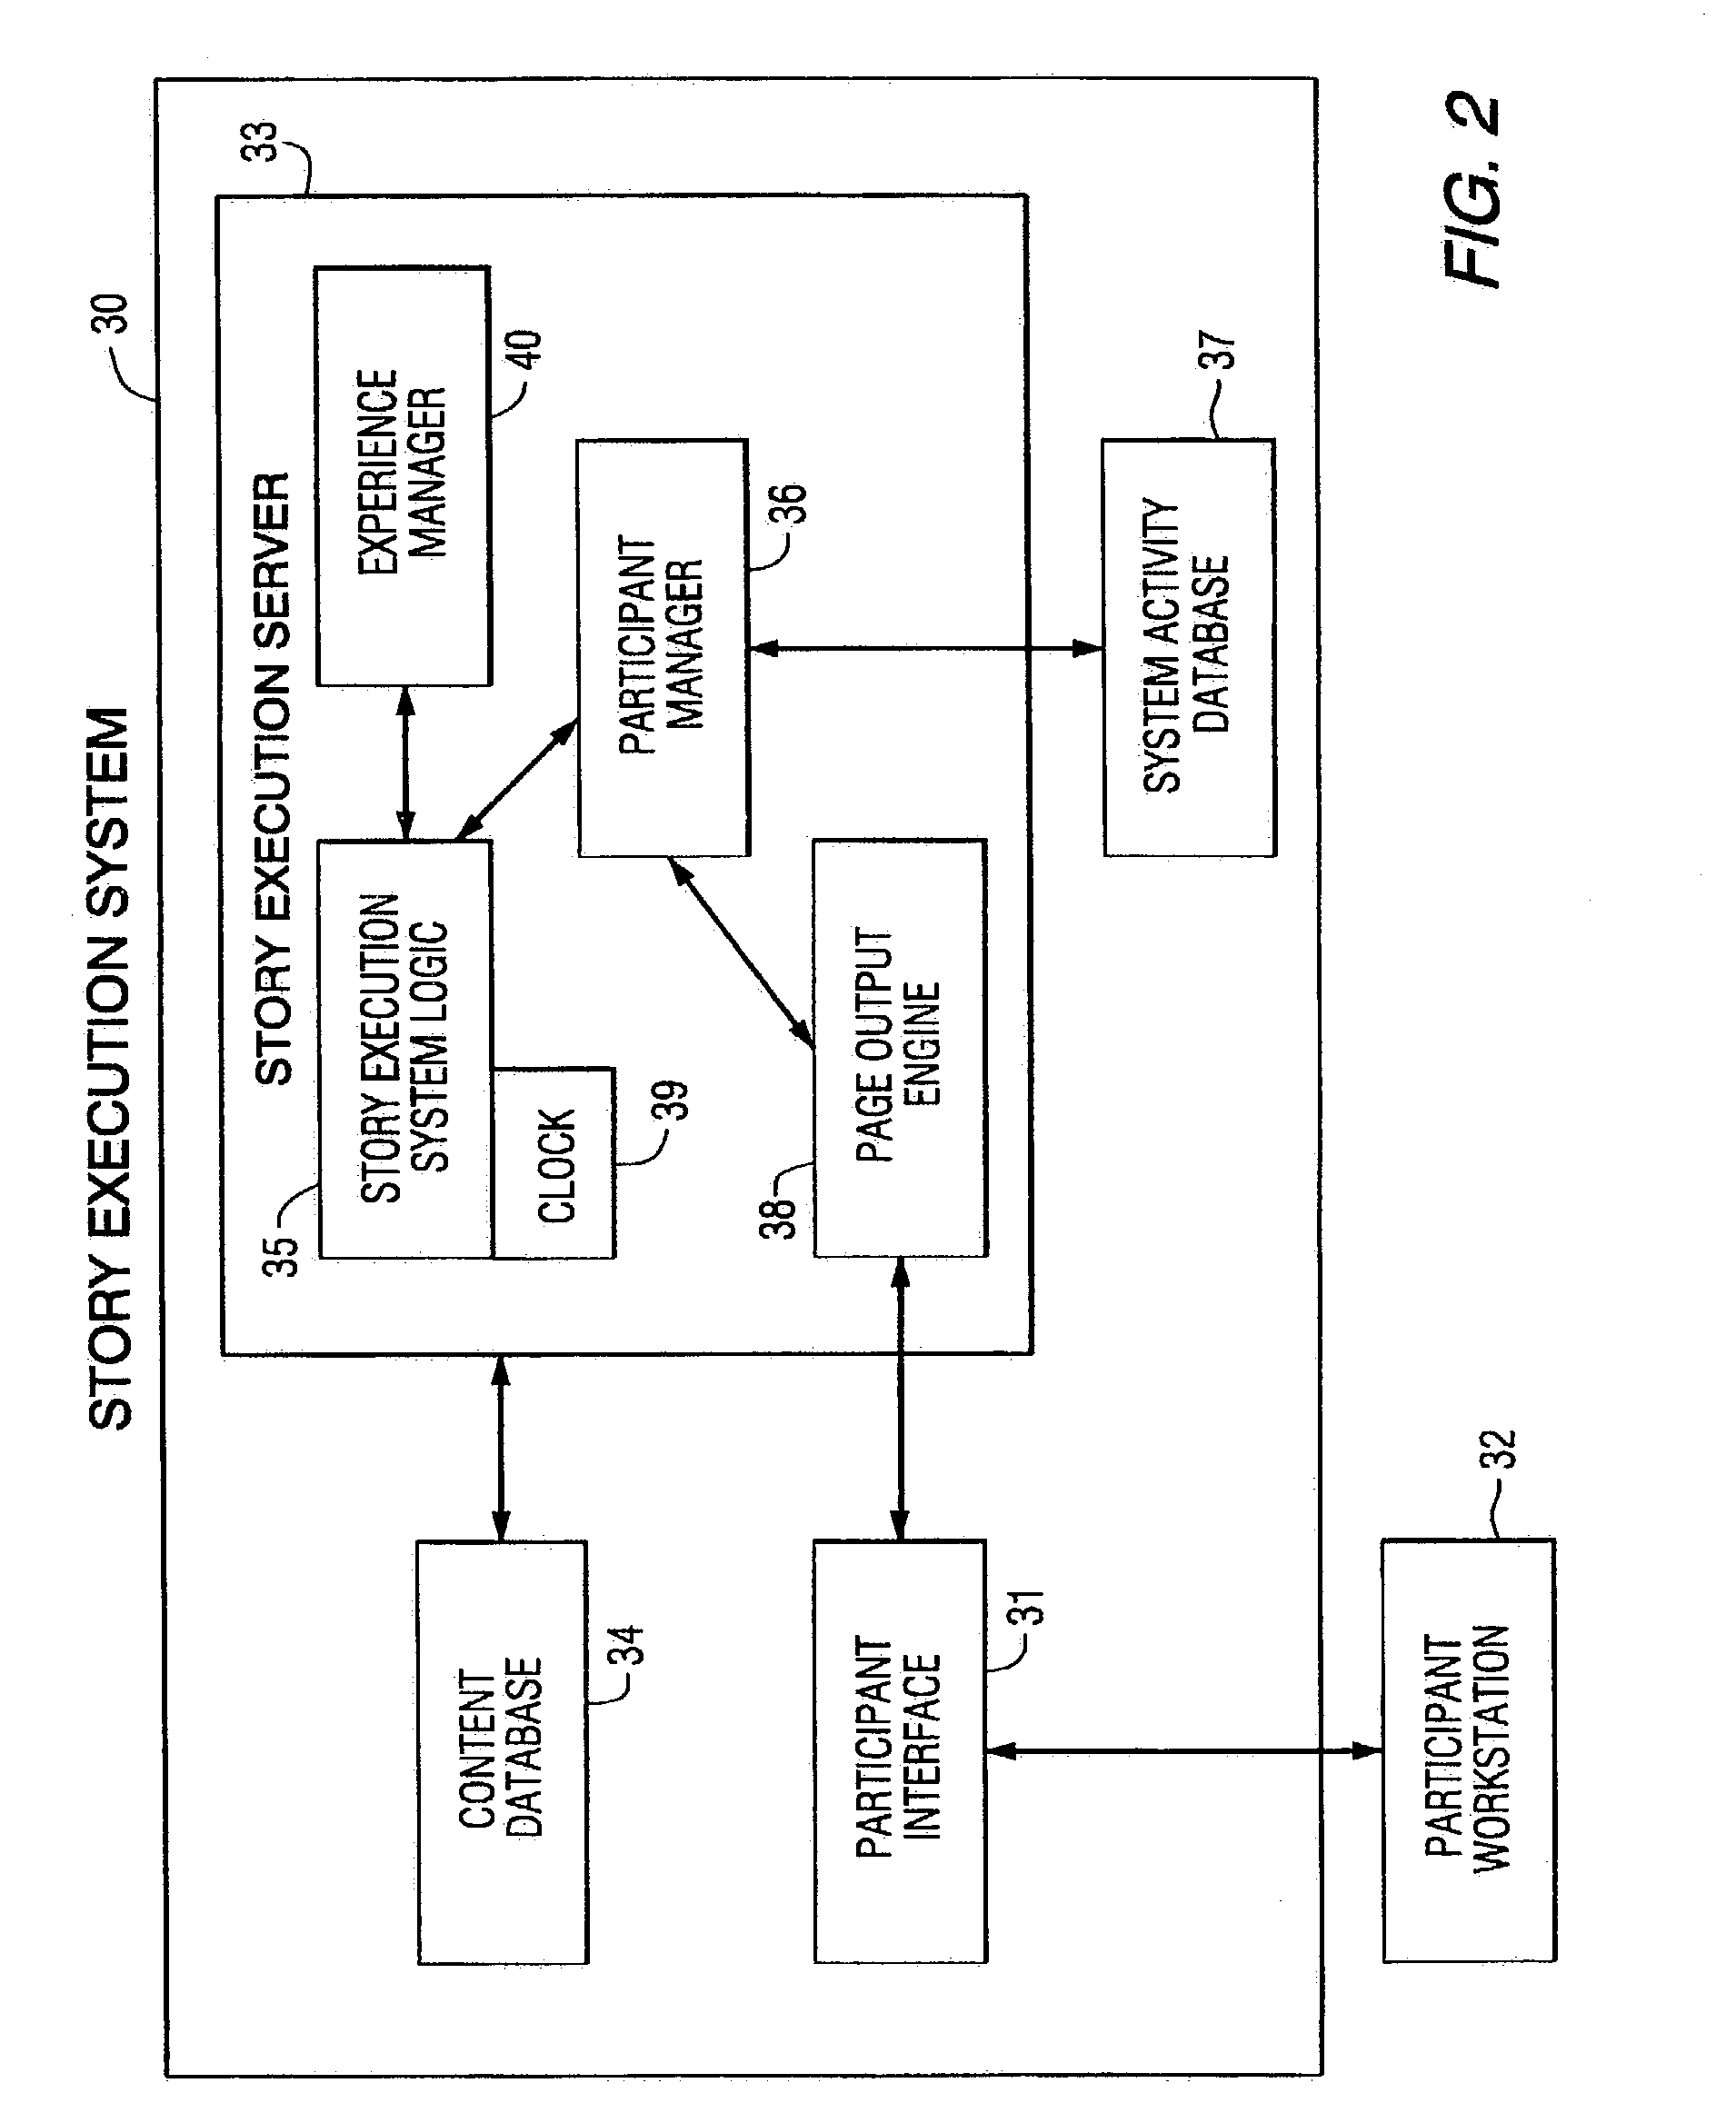 Method and apparatus for advanced leadership training simulation and gaming applications